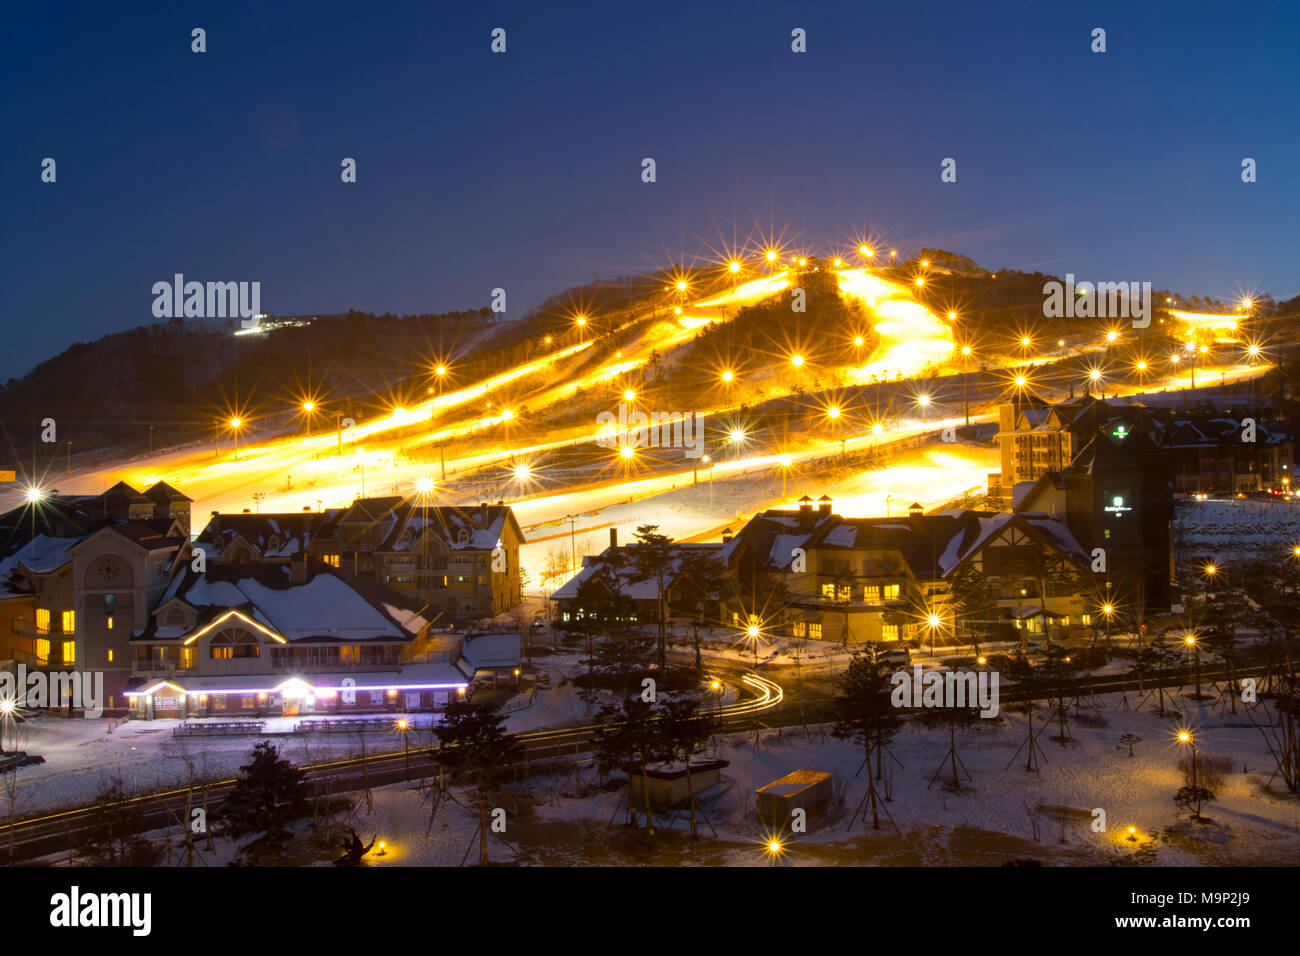 At night the Alpensia resort in the Gangwon-do region of South Korea is lit by lights.  Some South Korean ski resorts offers night skiing for people from Seoul who can only ski after working hours.  The Alpensia Resort is a ski resort and a tourist attraction. It is located on the territory of the township of Daegwallyeong-myeon, in the county of Pyeongchang, hosting the Winter Olympics in February 2018.  The ski resort is approximately 2.5 hours from Seoul or Incheon Airport by car, predominantly all motorway.   Alpensia has six slopes for skiing and snowboarding, with runs up to 1.4 km Stock Photo